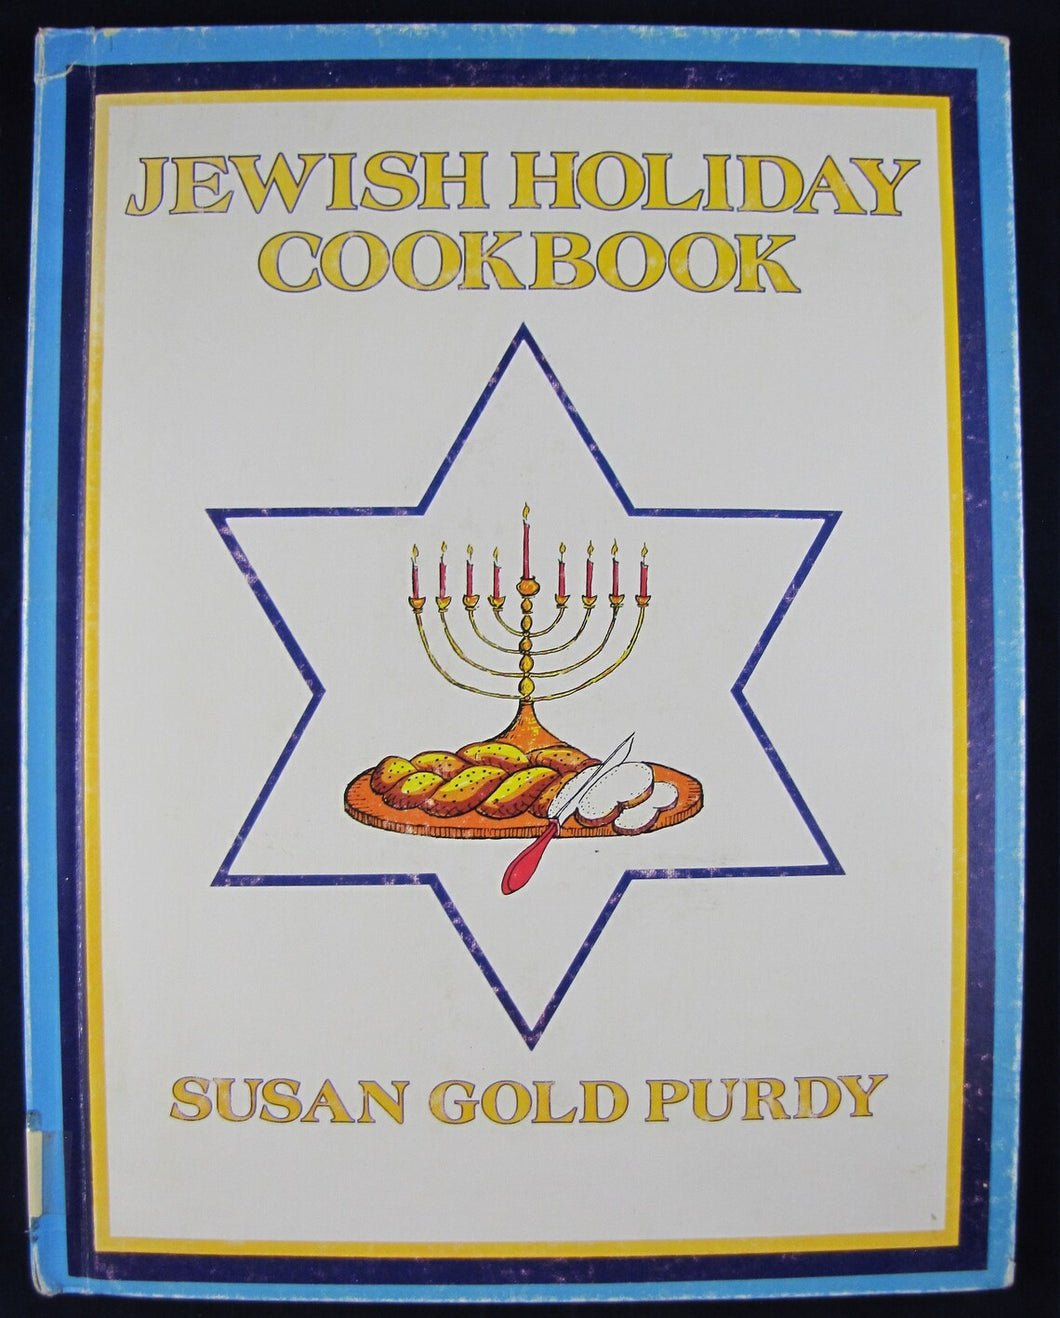 Jewish Holiday Cookbook by Susan Gold Purdy